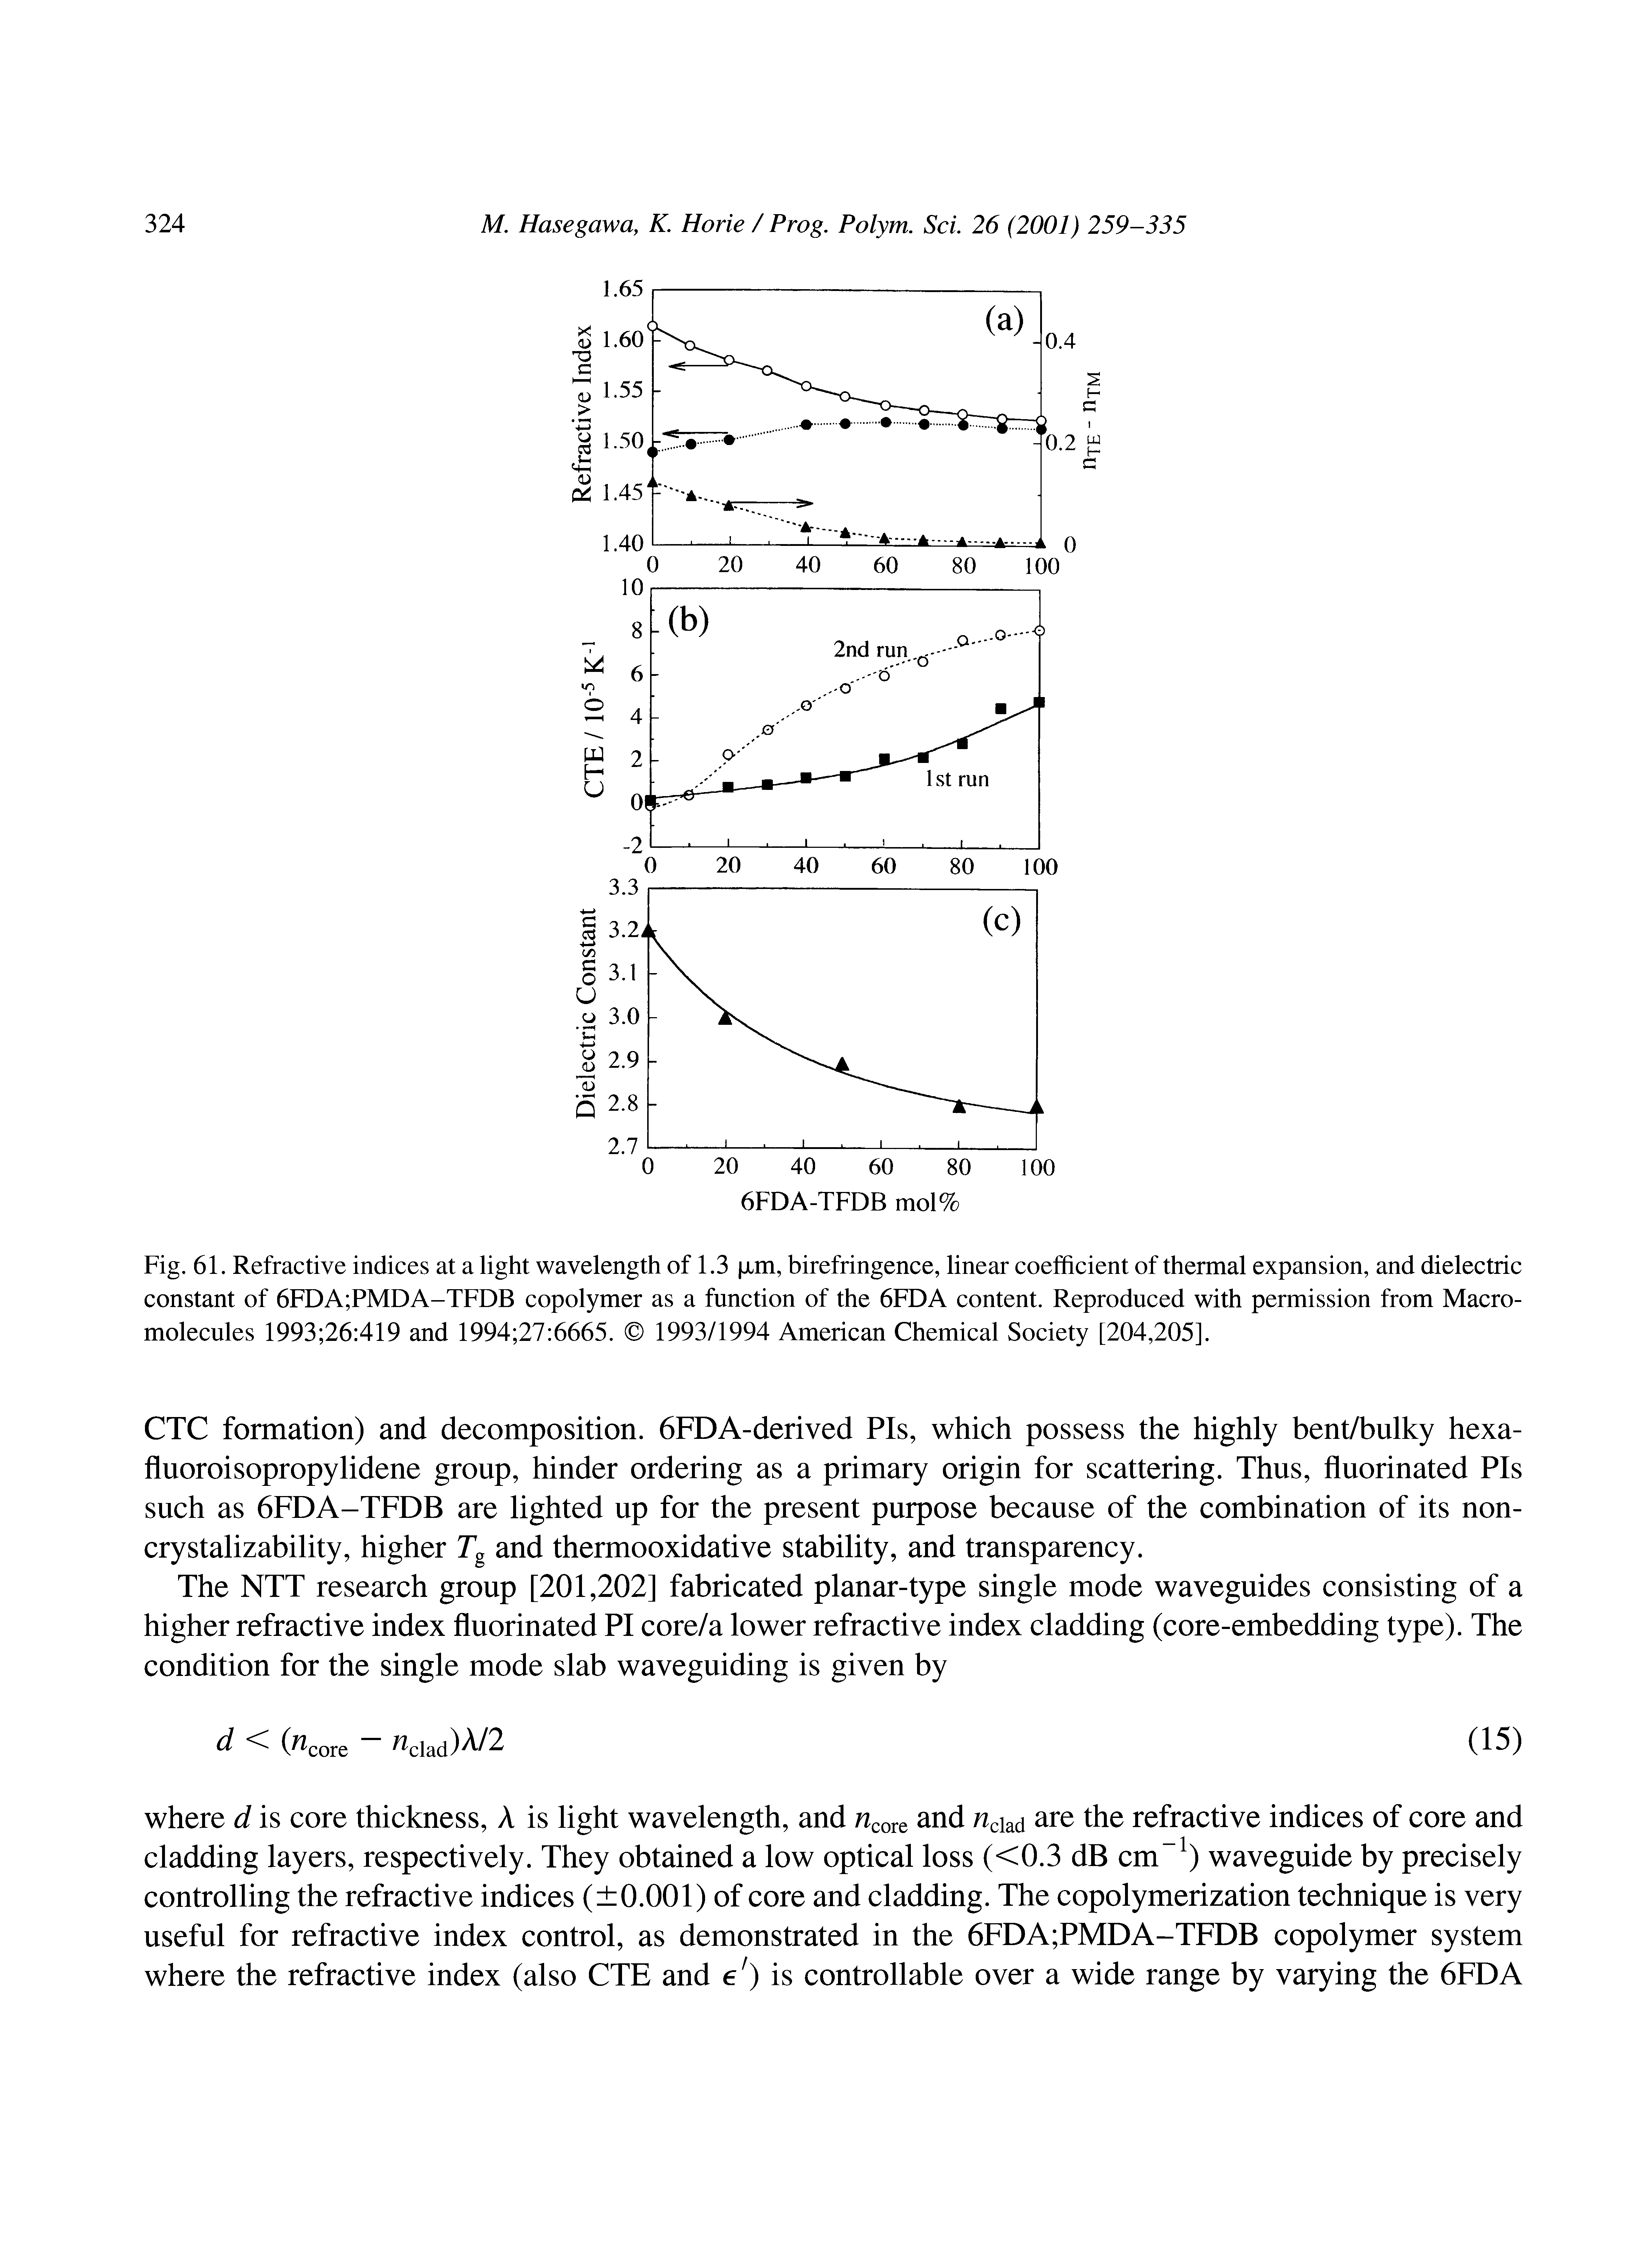 Fig. 61. Refractive indices at a light wavelength of 1.3 Jim, birefringence, linear coefficient of thermal expansion, and dielectric constant of 6FDA PMDA-TFDB copolymer as a function of the 6FDA content. Reproduced with permission from Macromolecules 1993 26 419 and 1994 27 6665. 1993/1994 American Chemical Society [204,205].